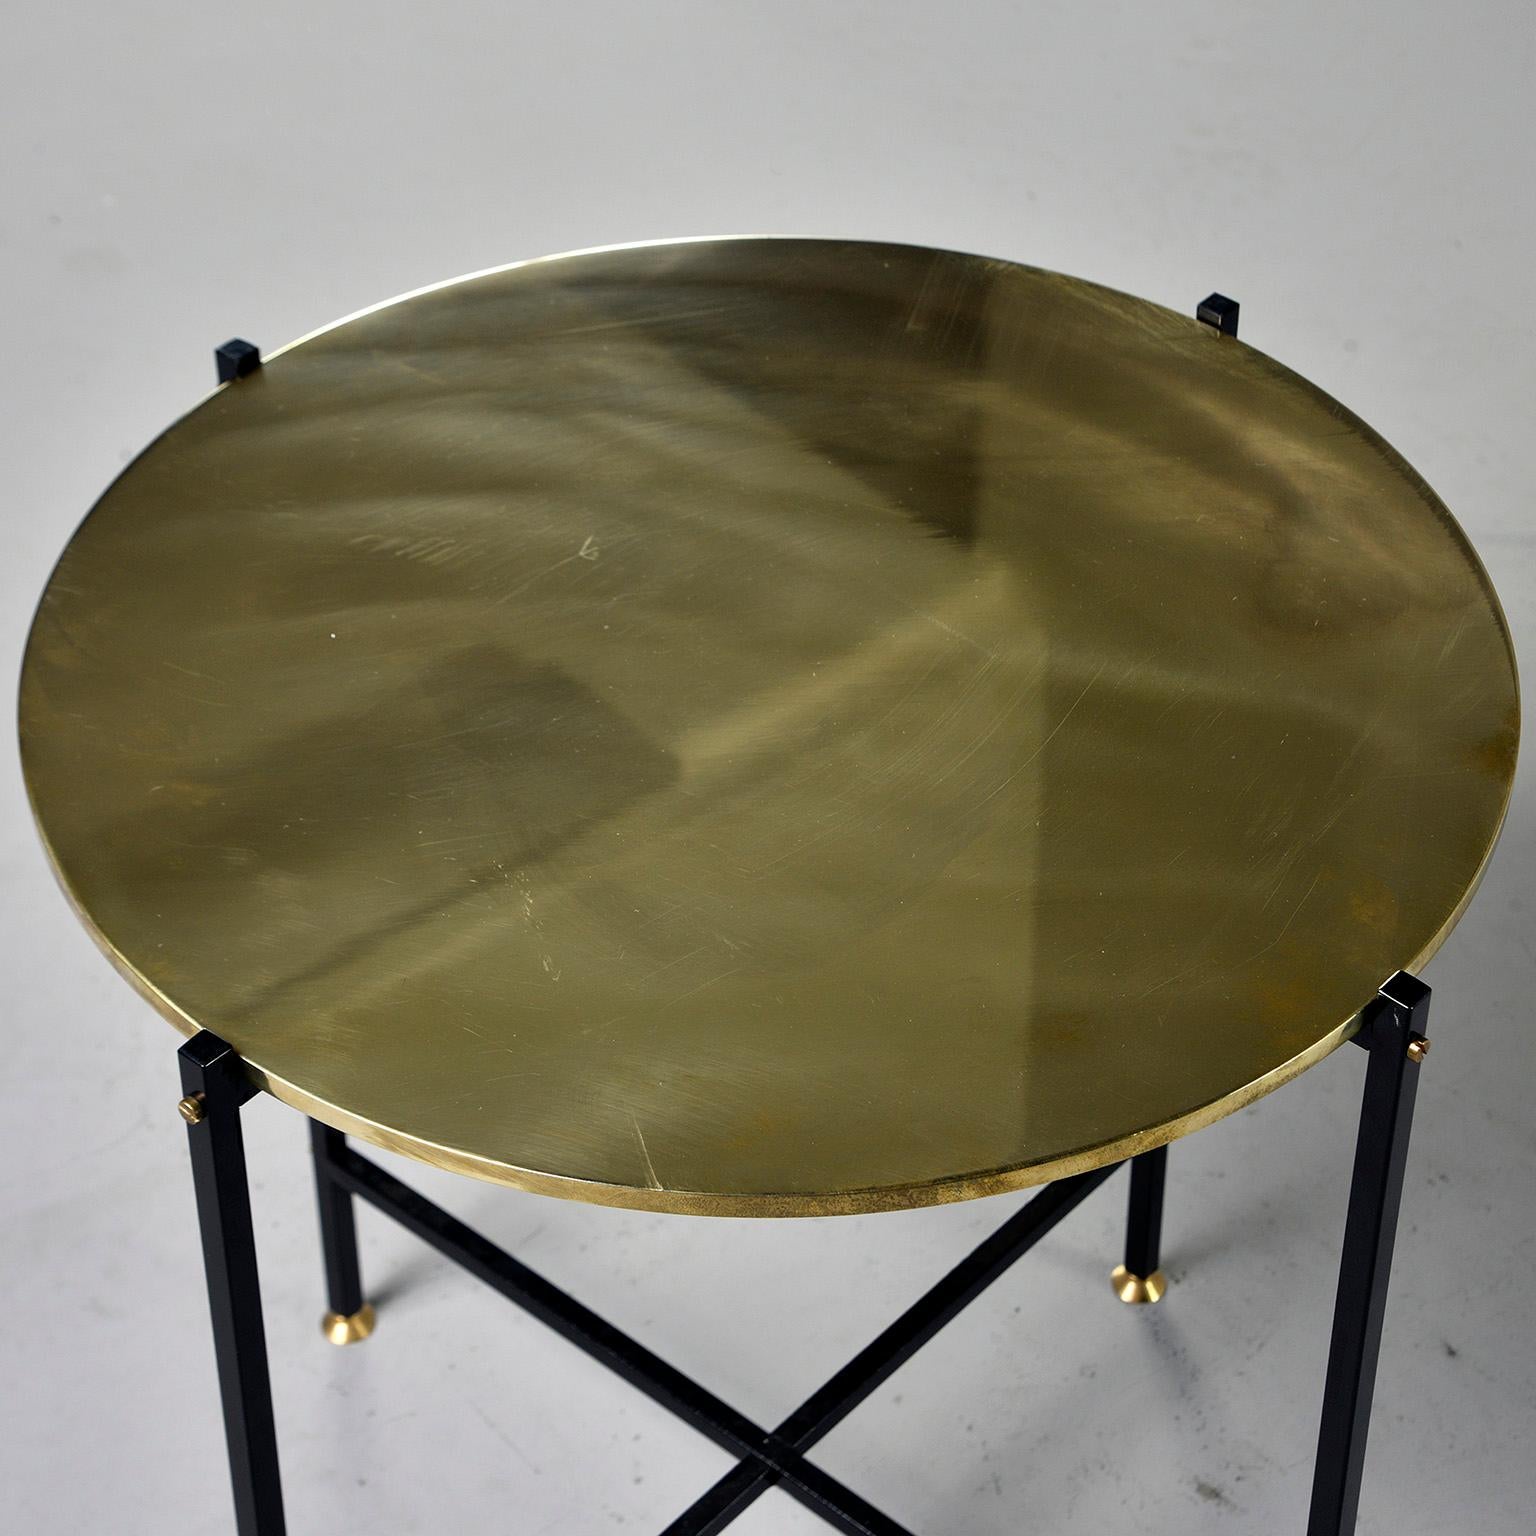 Contemporary Round Brass Top Side Table with Slender Black Iron Base